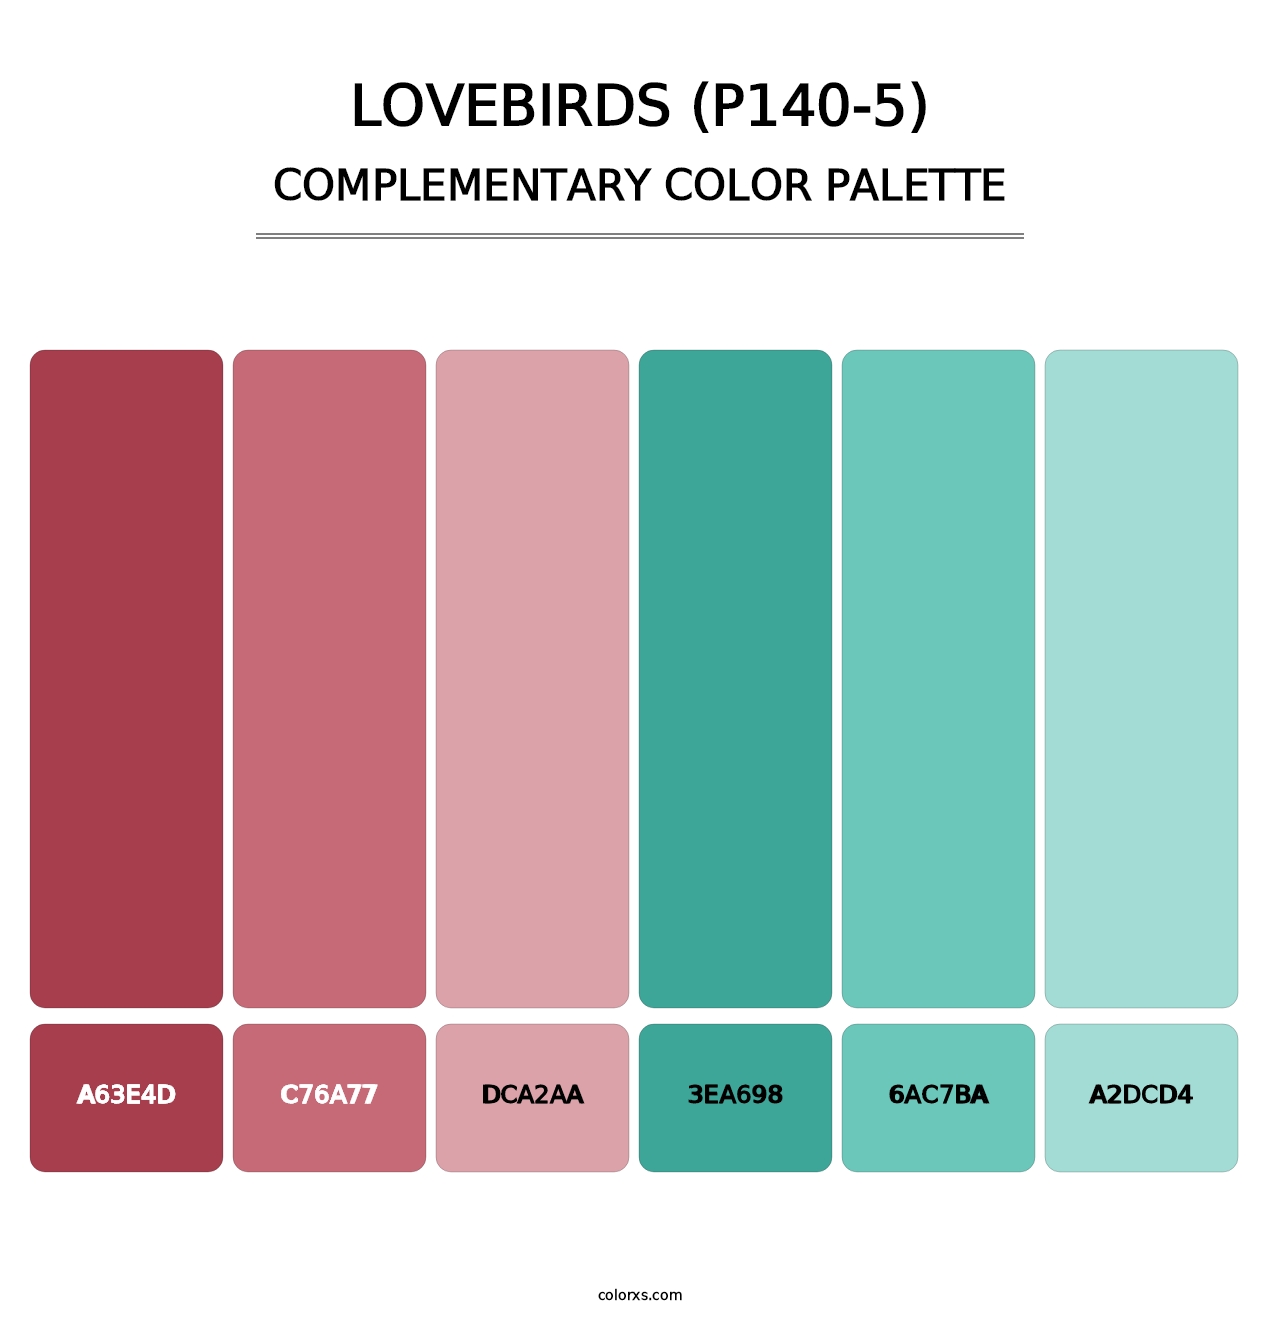 Lovebirds (P140-5) - Complementary Color Palette